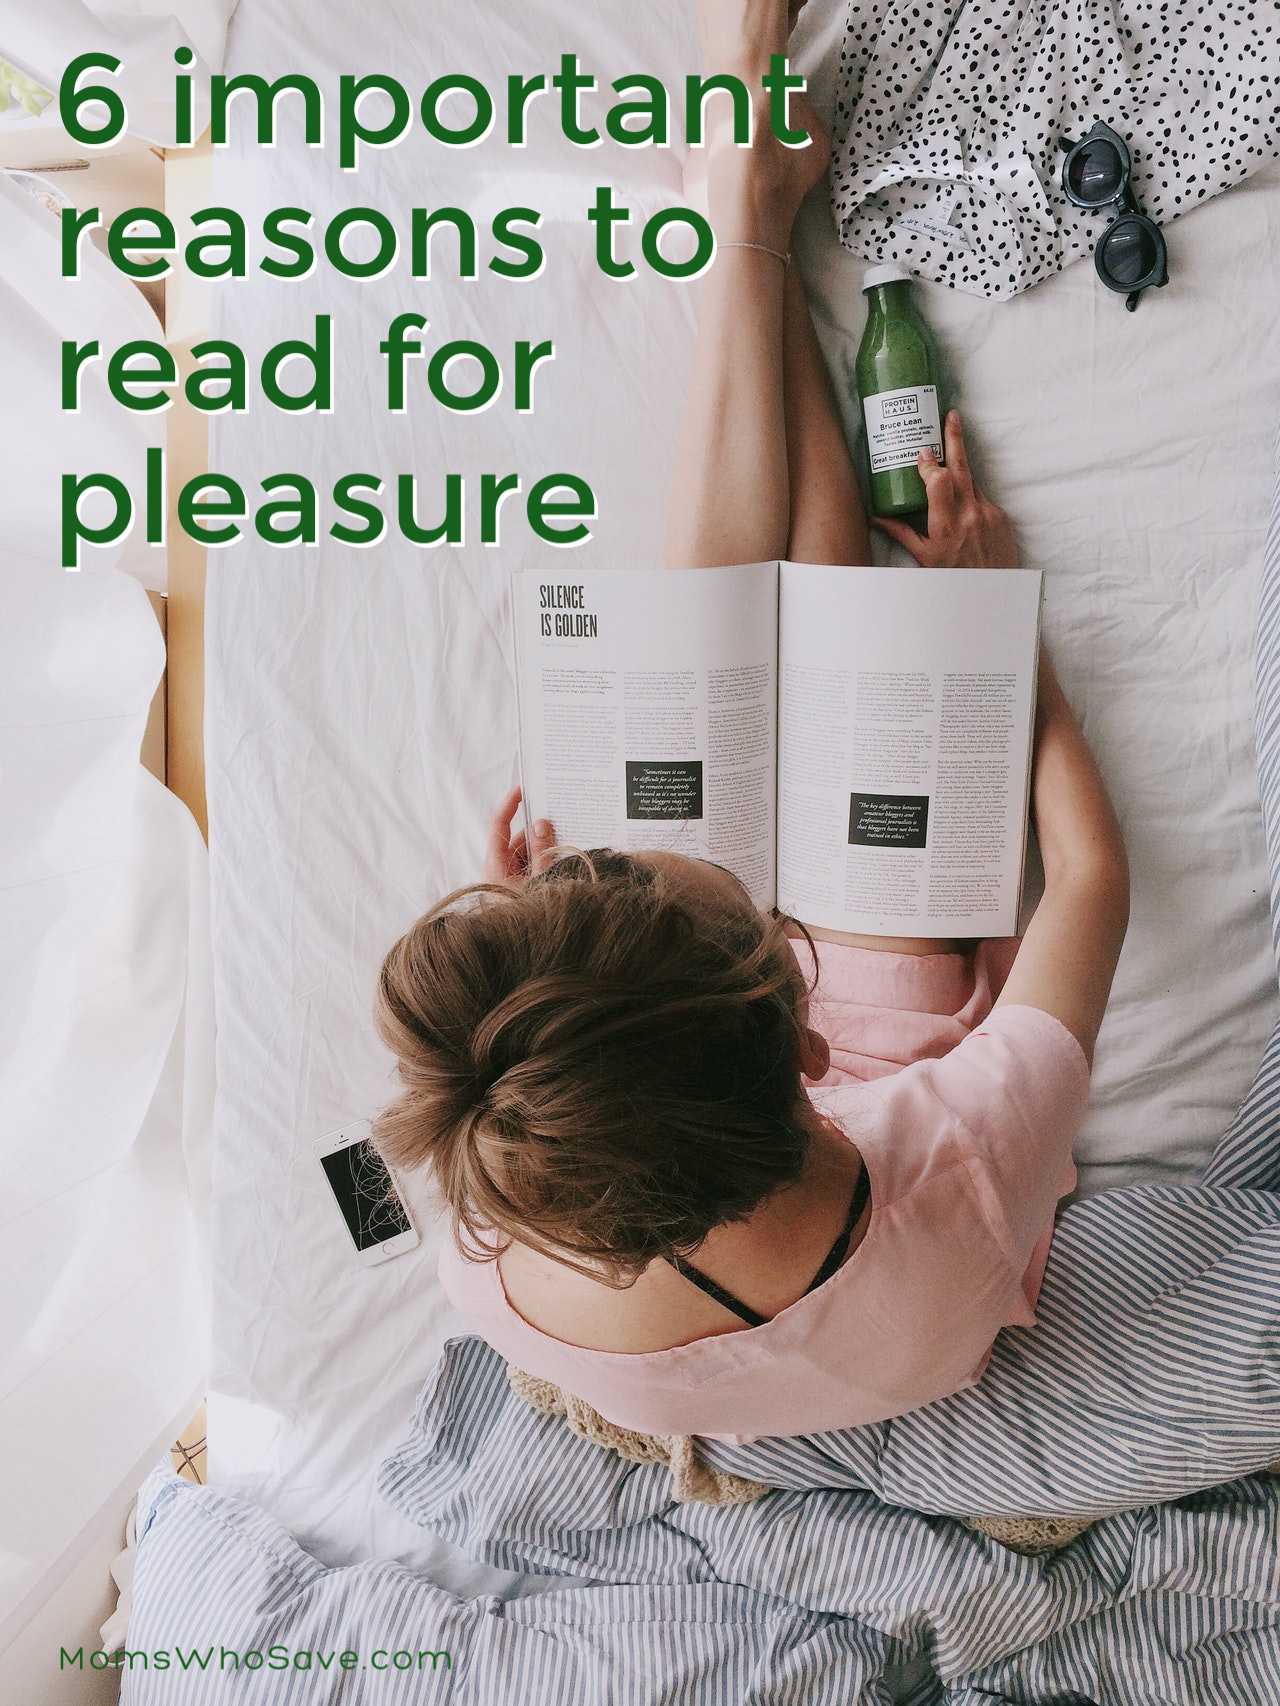 The Importance of Reading for Pleasure